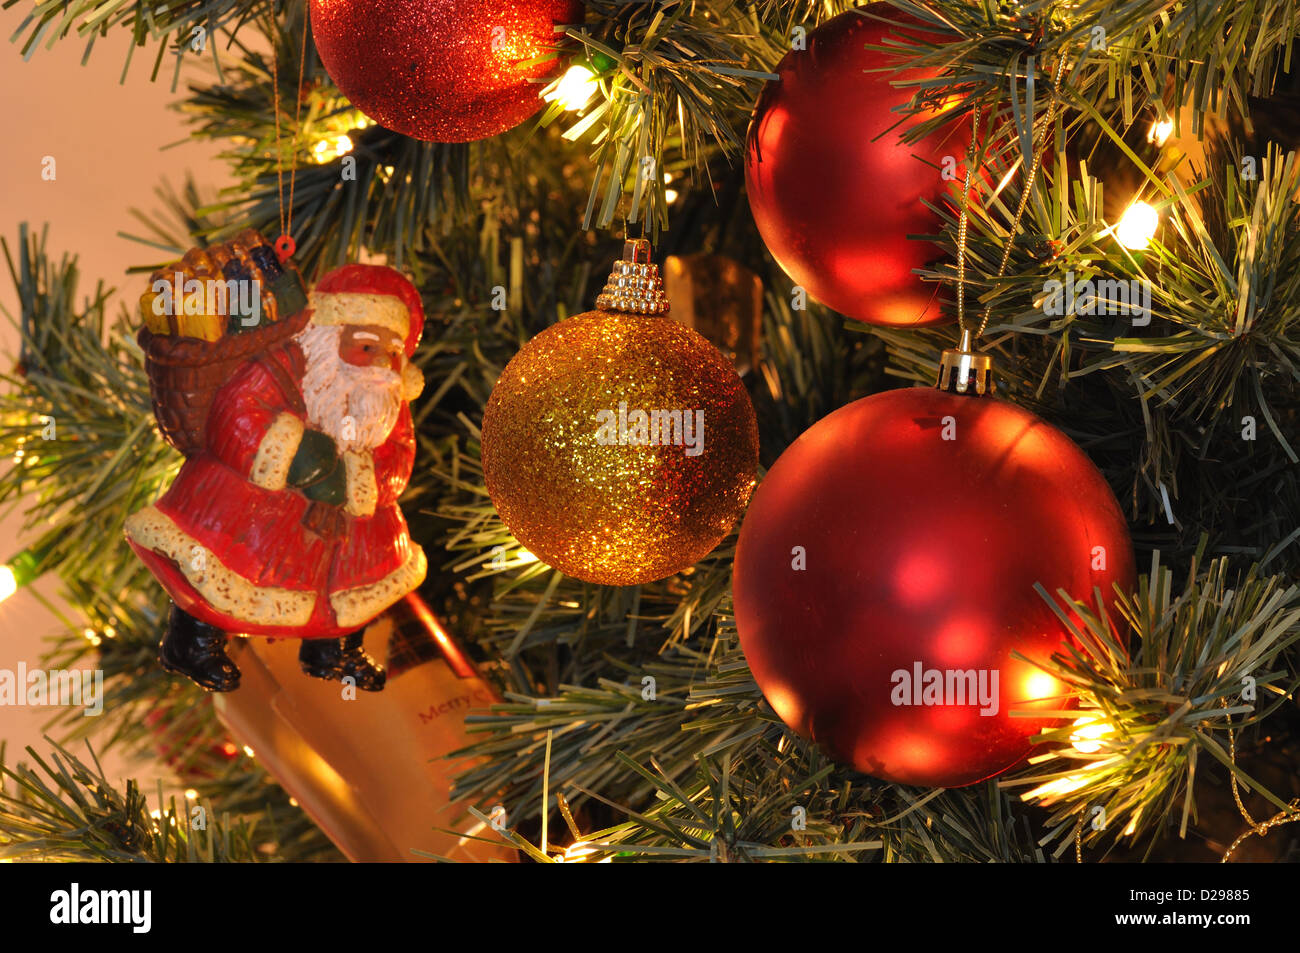 Christmas baubles and decorations hanging on a Christmas tree Stock Photo